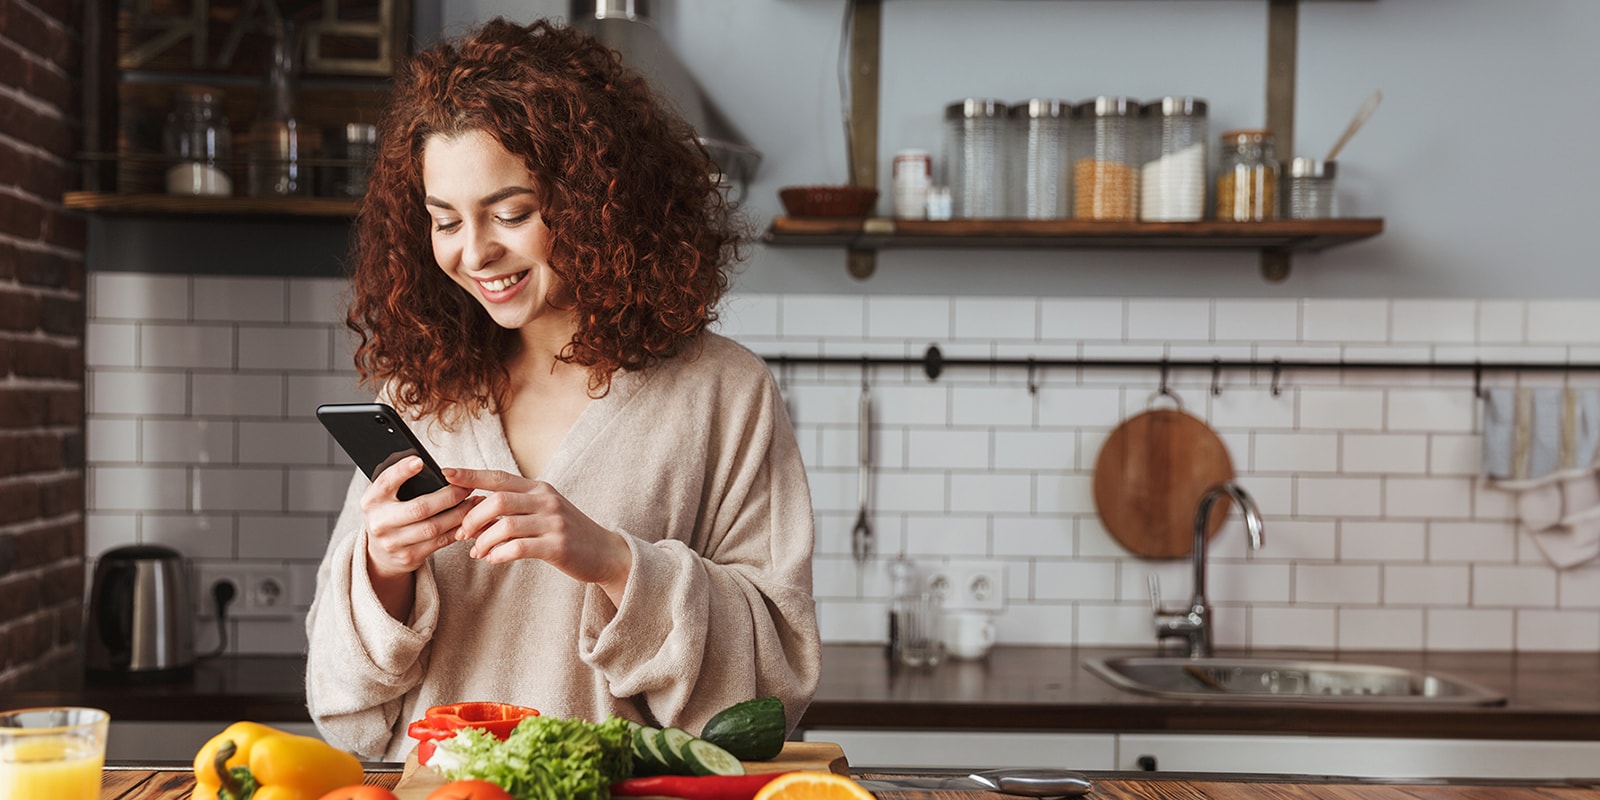 This is an image of a woman looking at a food recipe on her smartphone.